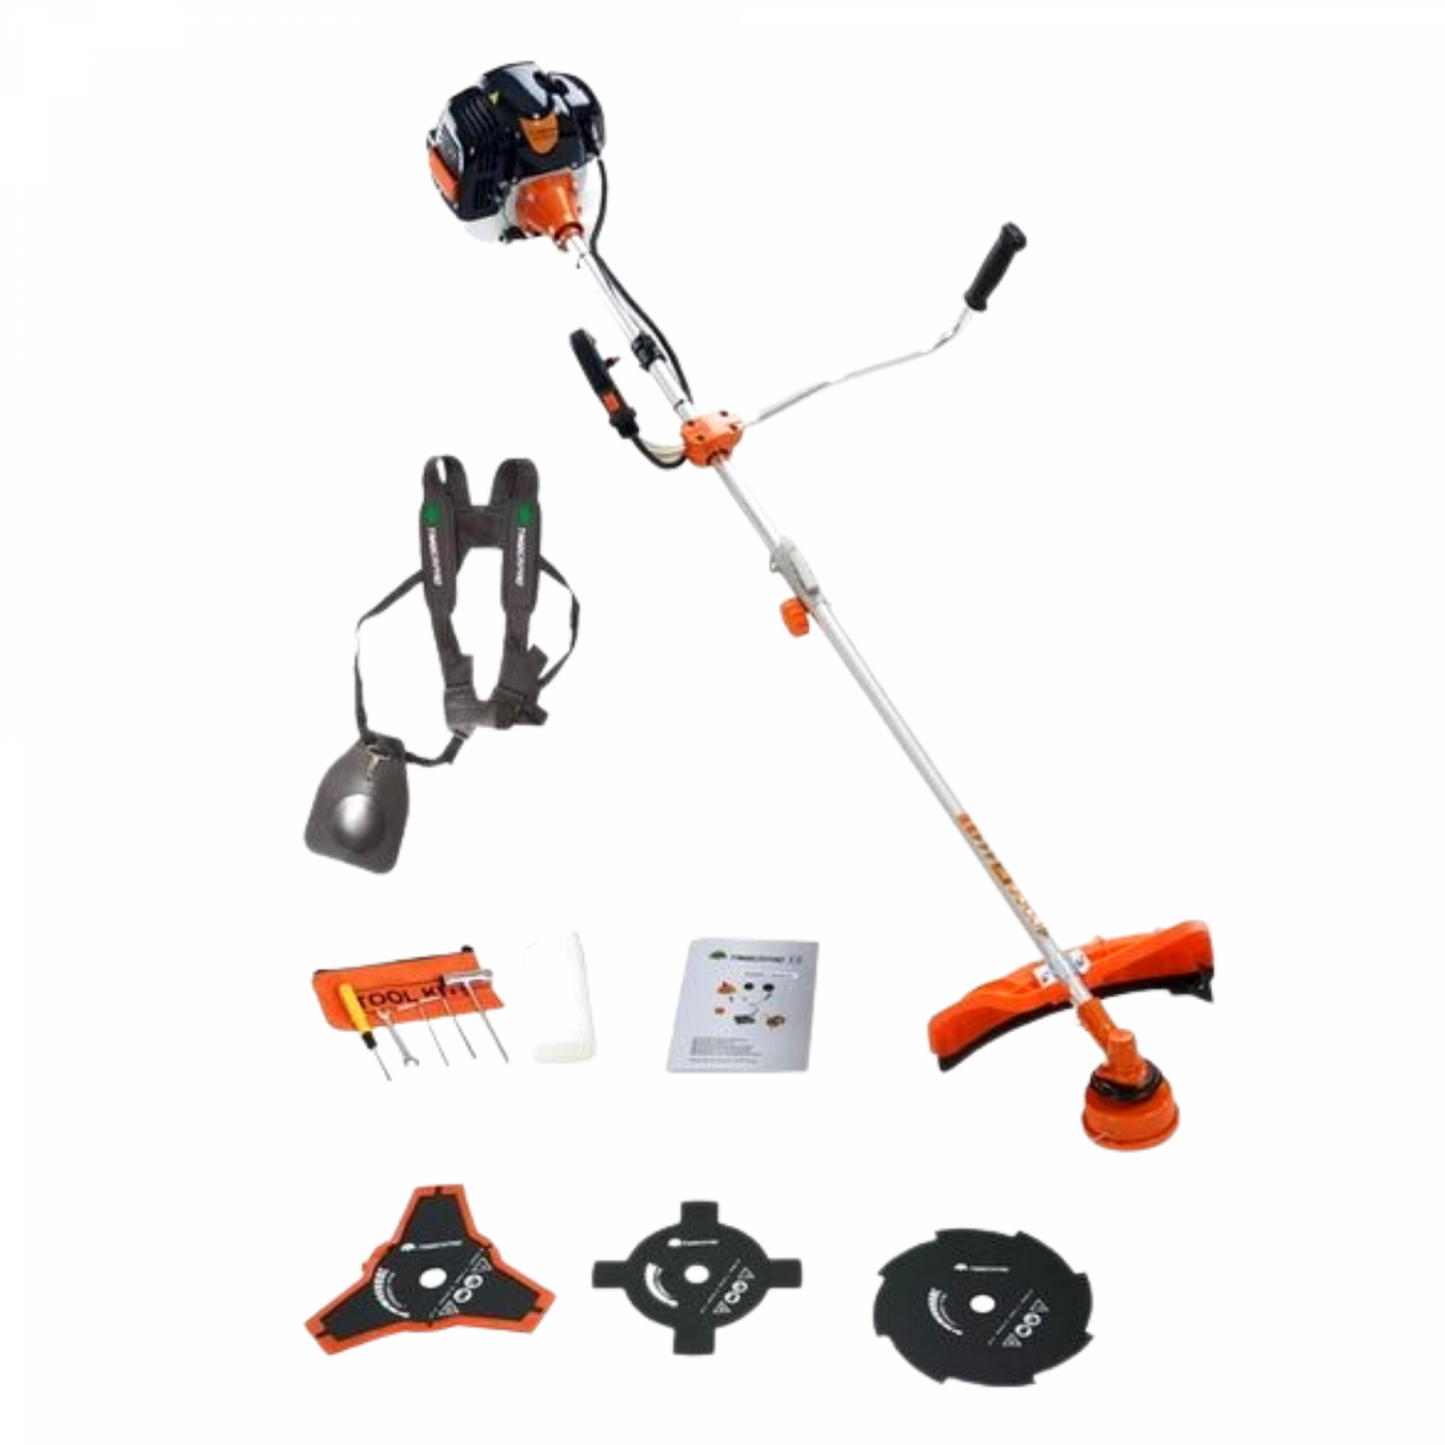 Powertech RL-PT580: 8in1 Professional Brush Cutter, Hedge Trimmer, and Chain Saw